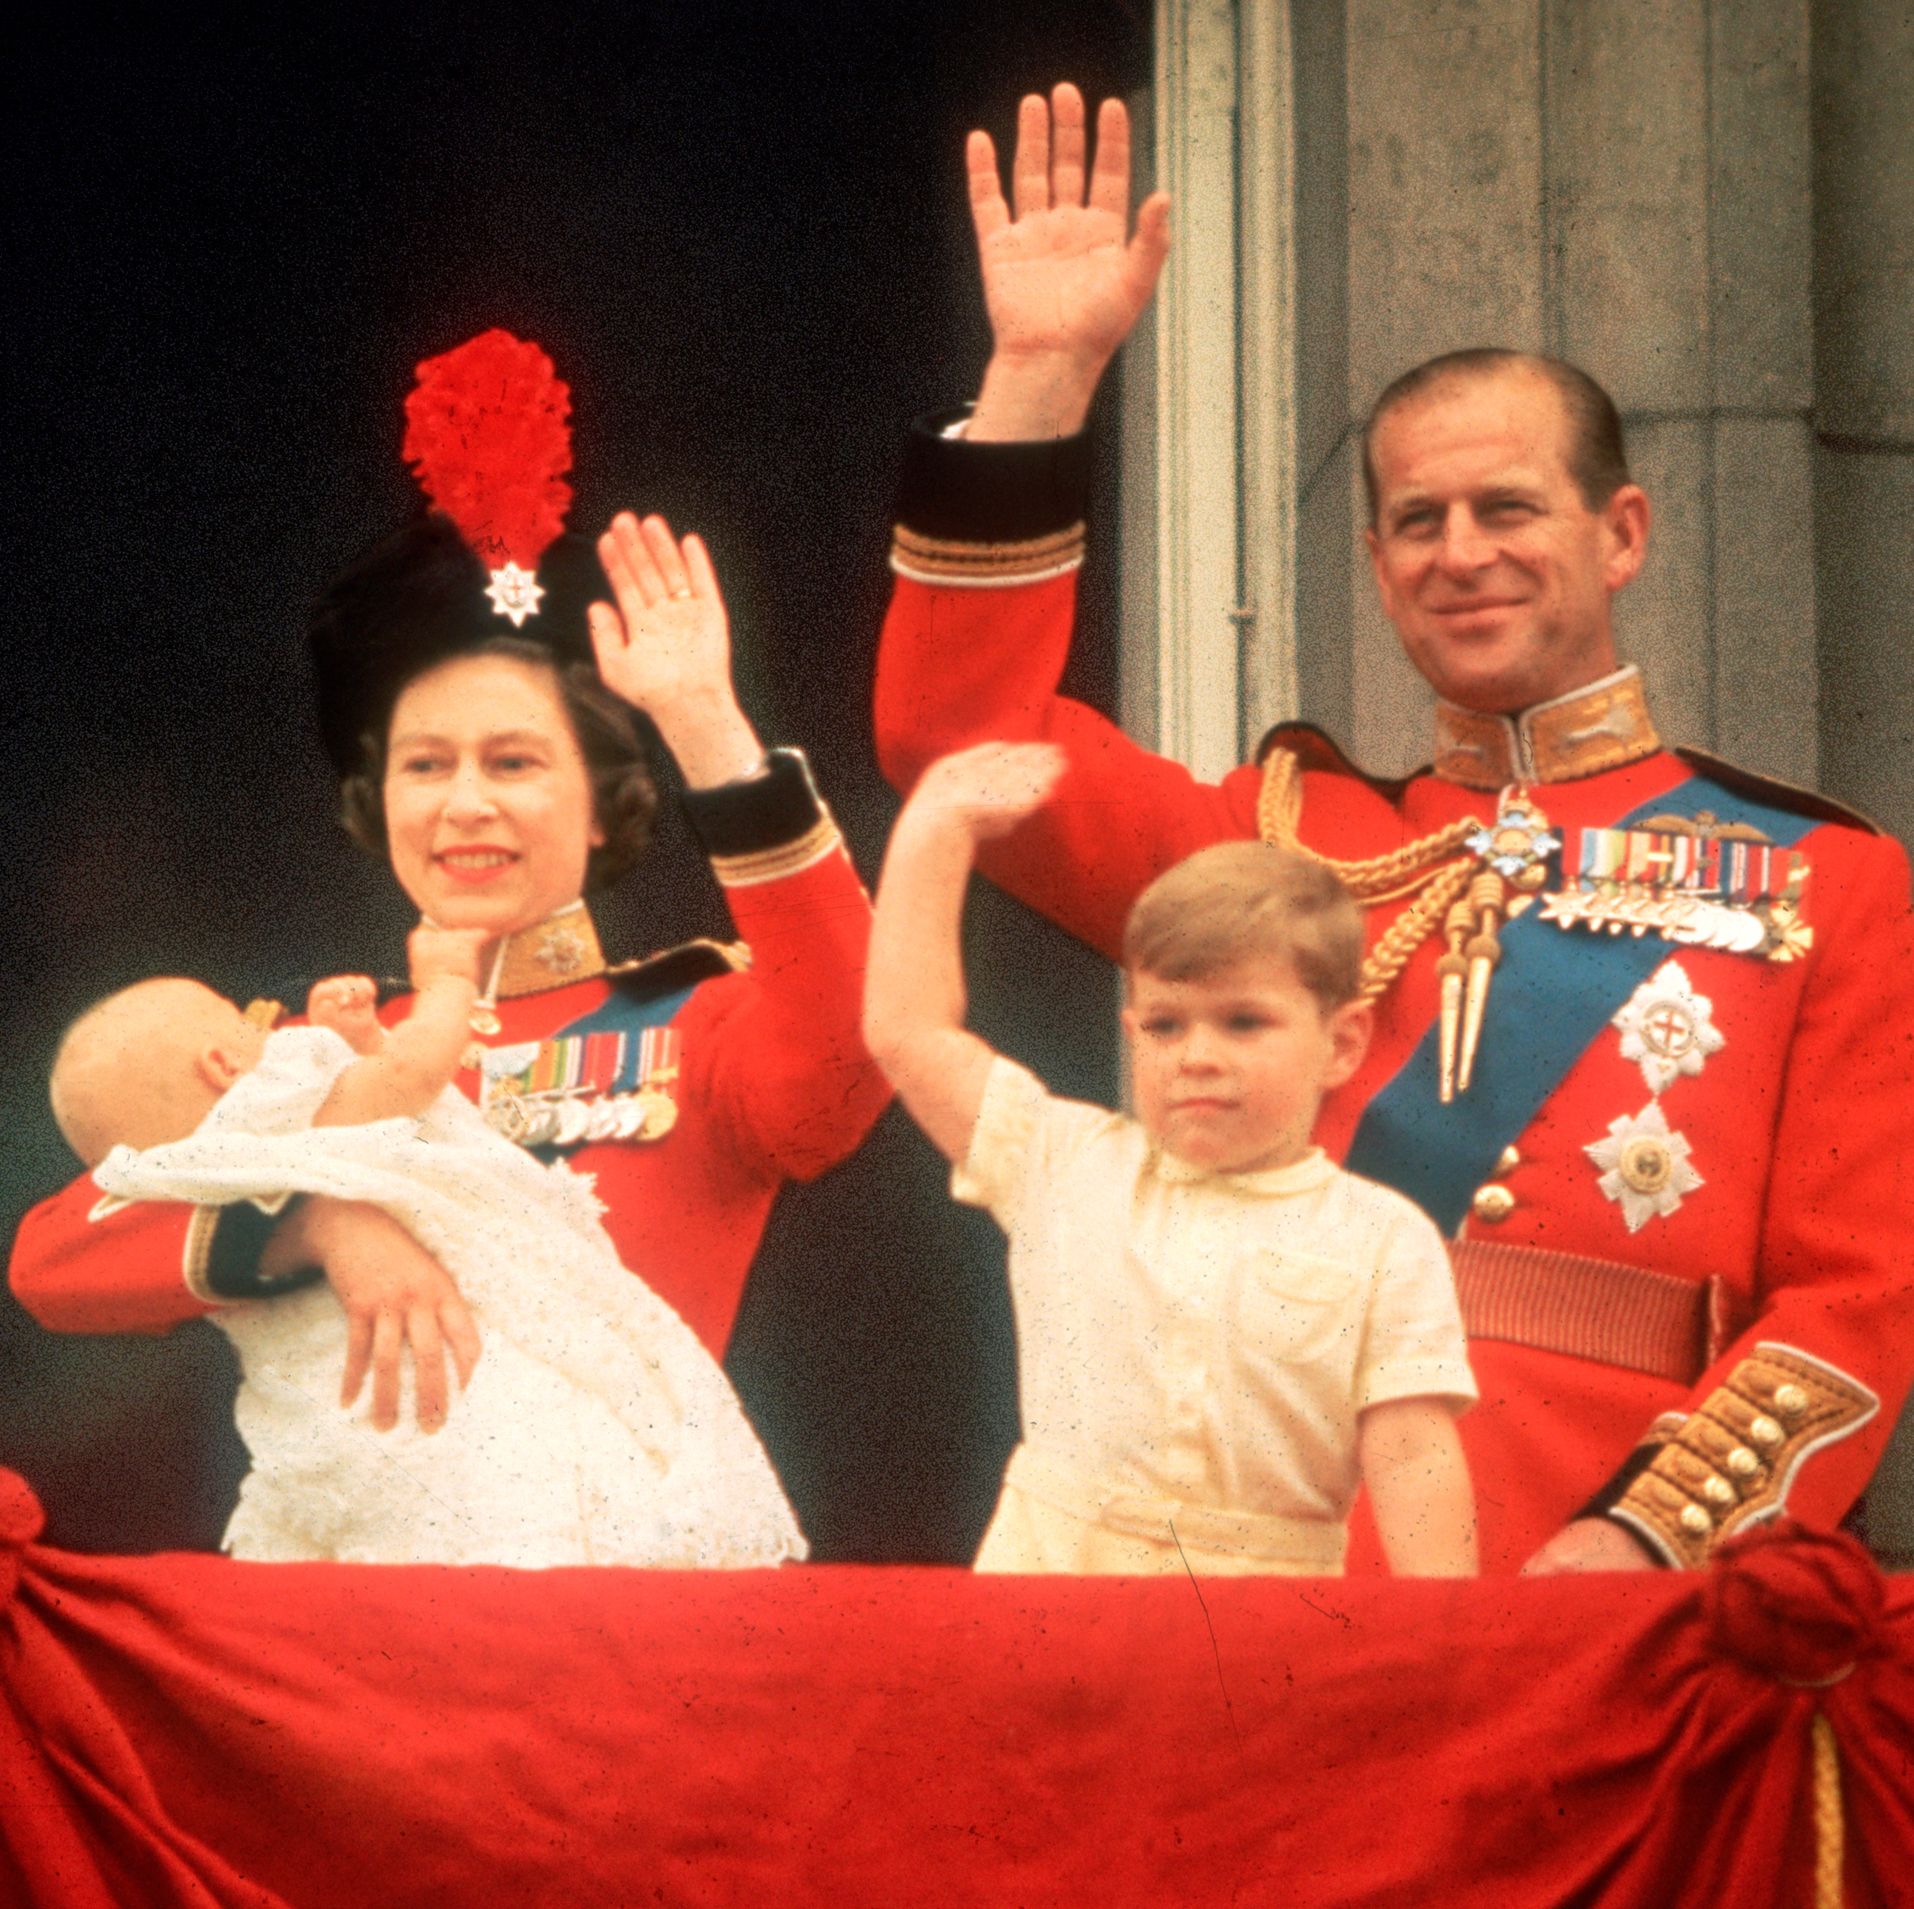 Queen Elizabeth's 70 Year Reign: A Tribute to Her Life of Duty